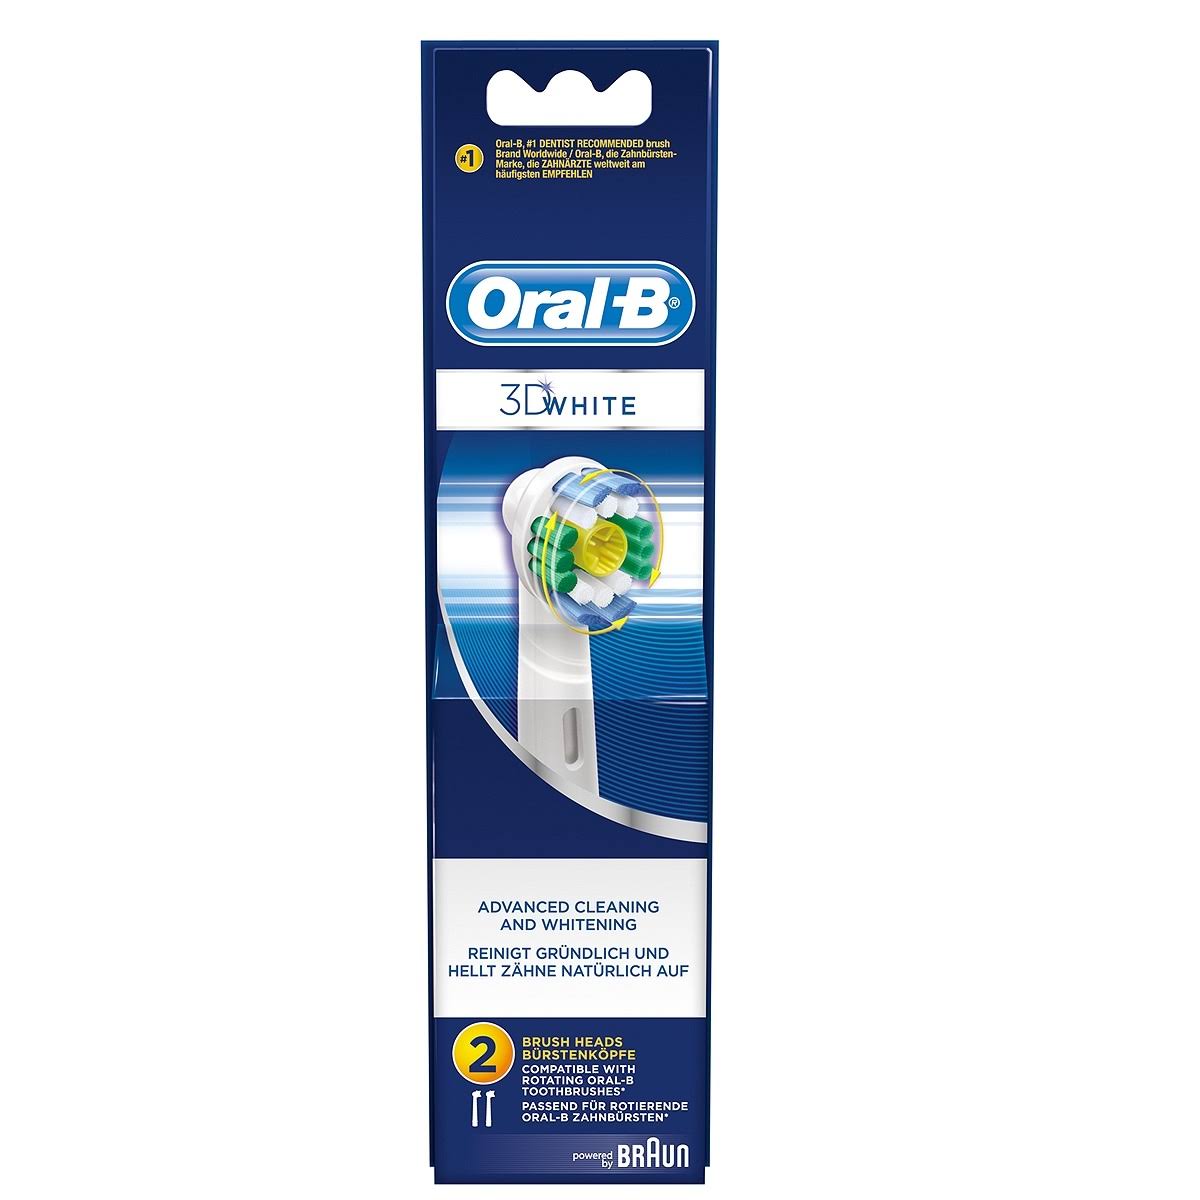 Oral-B 3D White Toothbrush Replacement Brush Heads Refill - 2 Count